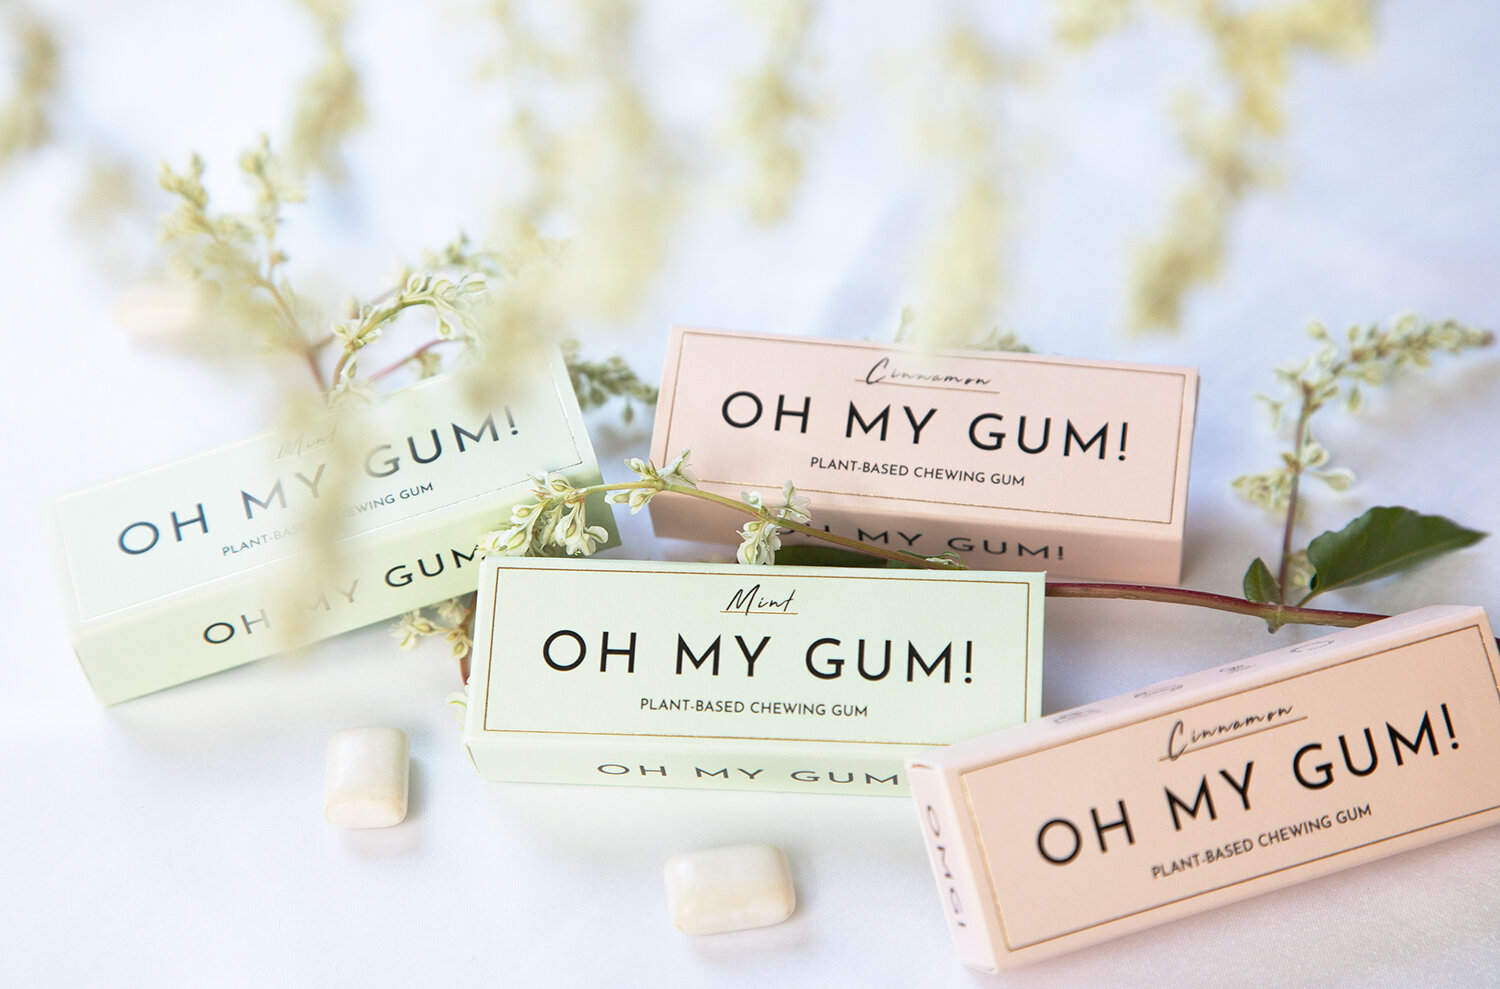 OH MY GUM! is plastic-free and plant-based chewing gum made with chicle